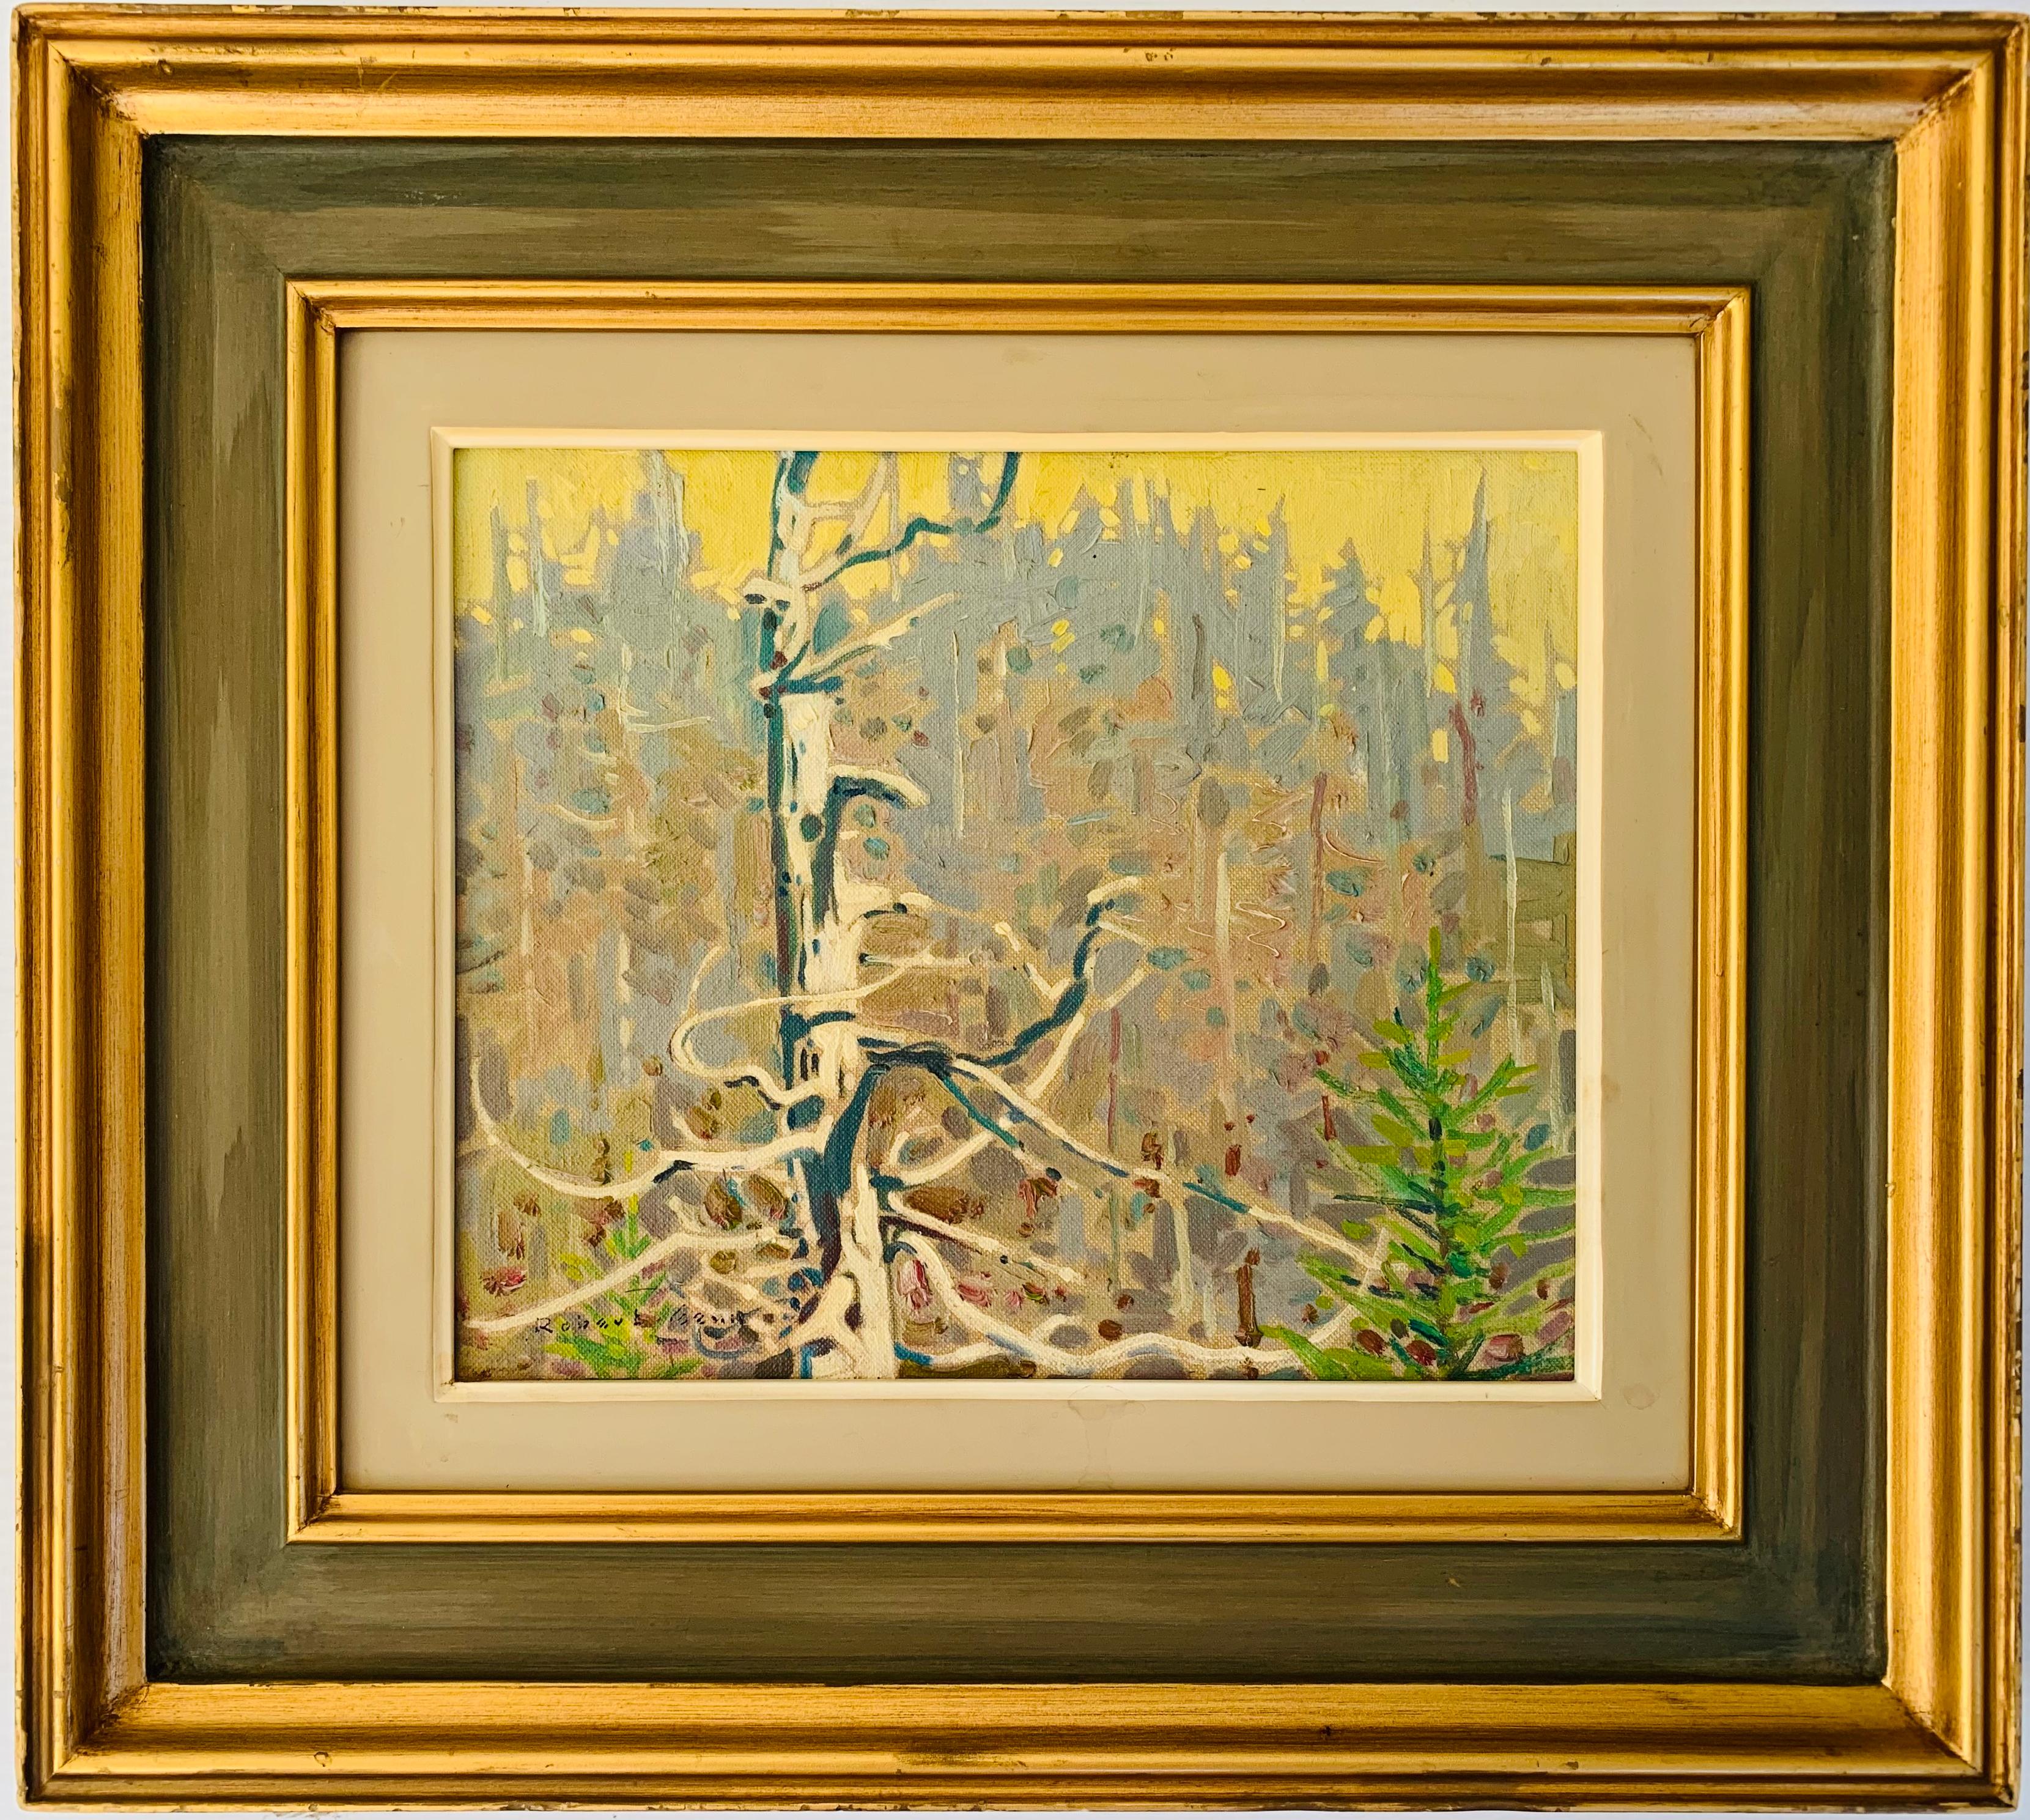 Tree on a hill - Painting by Robert Genn